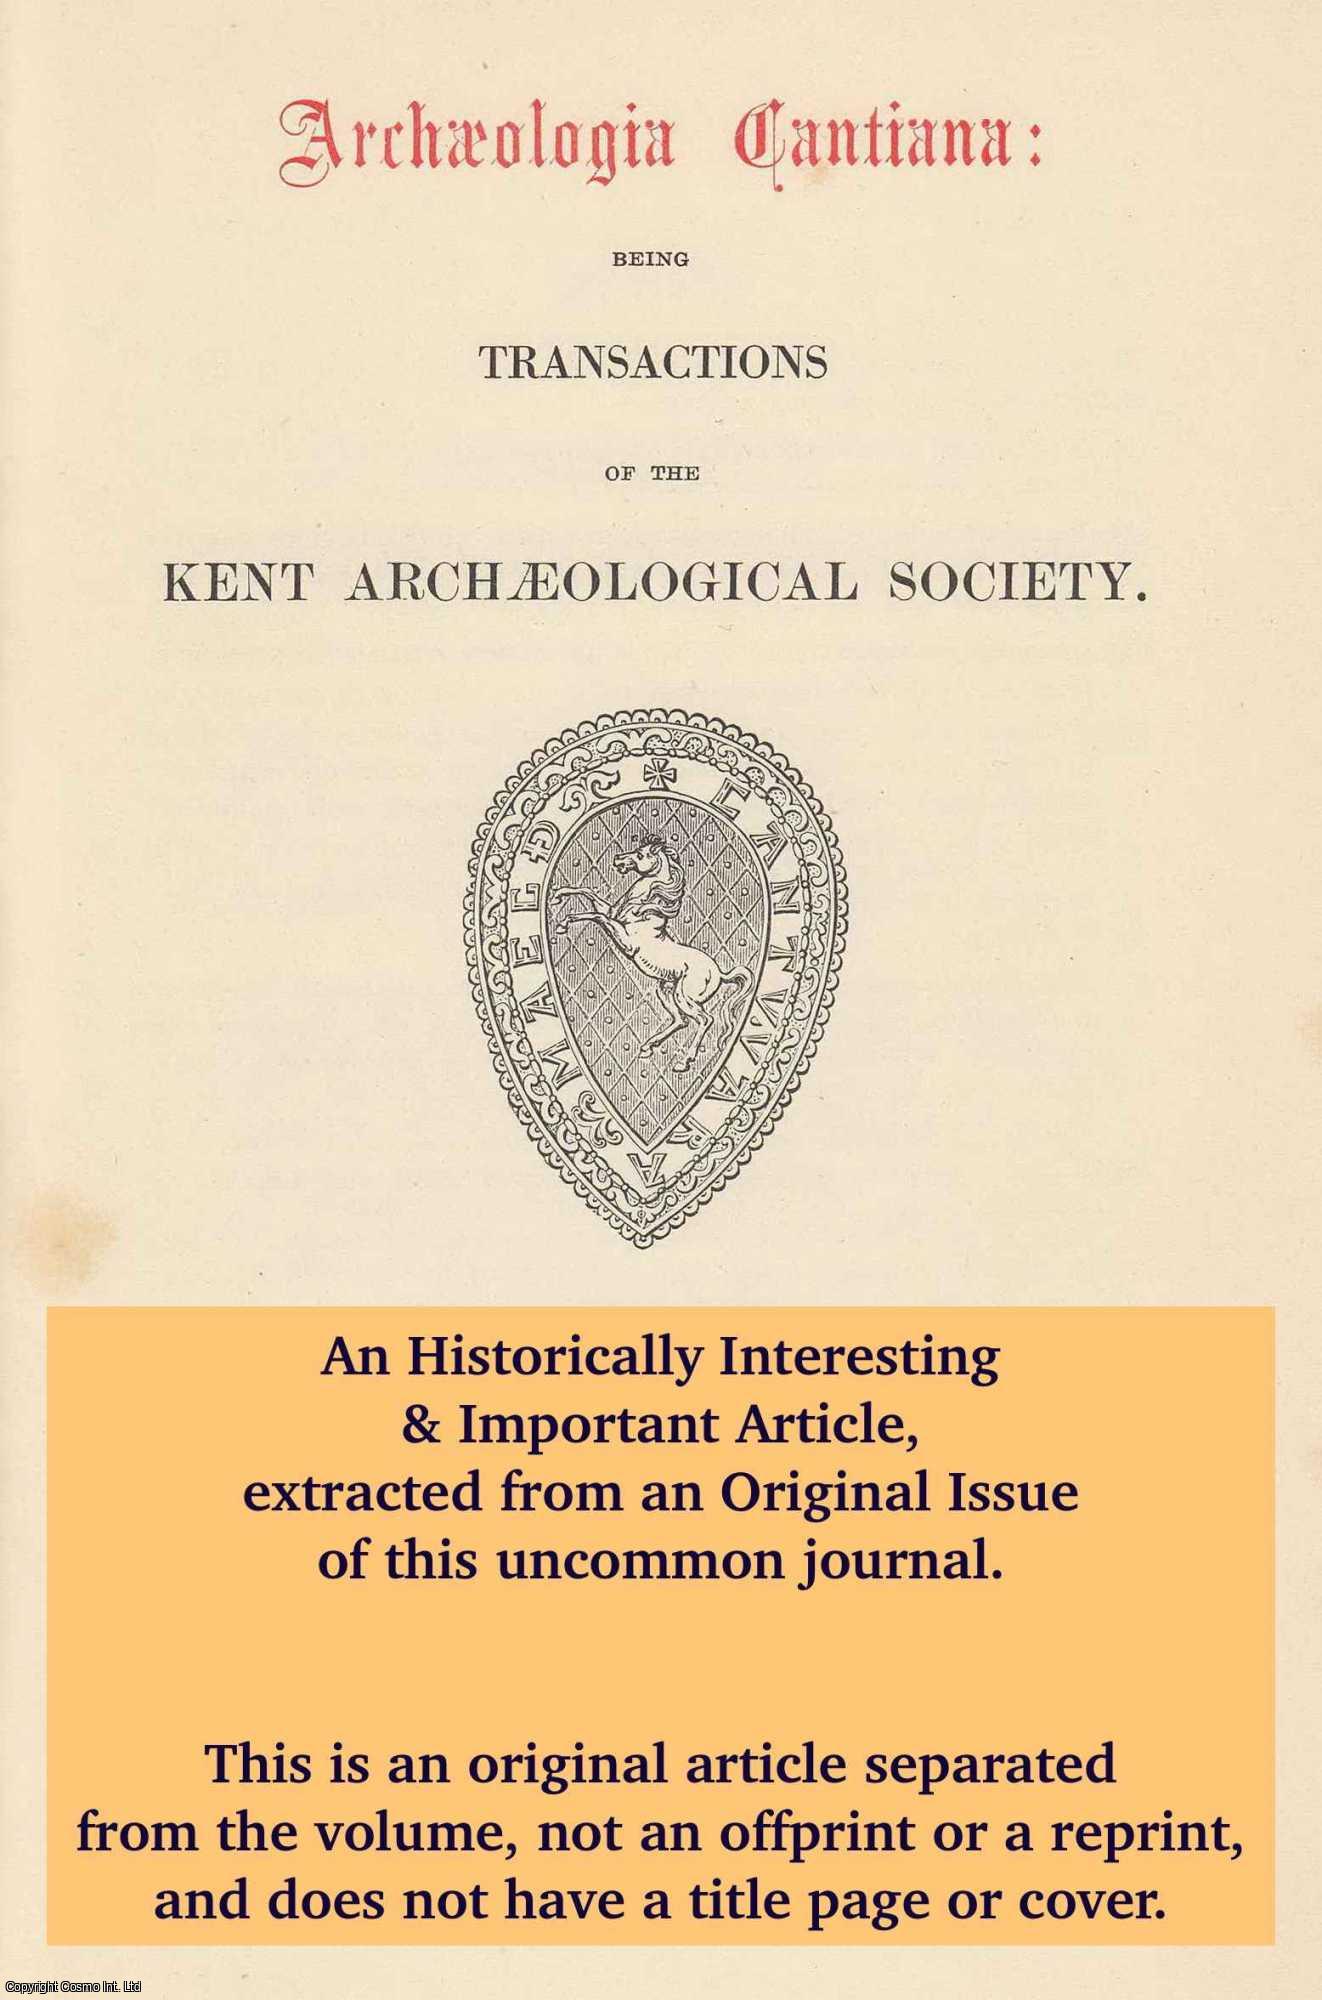 Mary Adams - The Development of Roof-Tiling and Tile-Making on some Mid-Kent Manors of Christ Church Priory in the Thirteenth and Fourteenth Centuries. An original article from The Archaeologia Cantiana: Transactions of The Kent Archaeological Society, 1997.